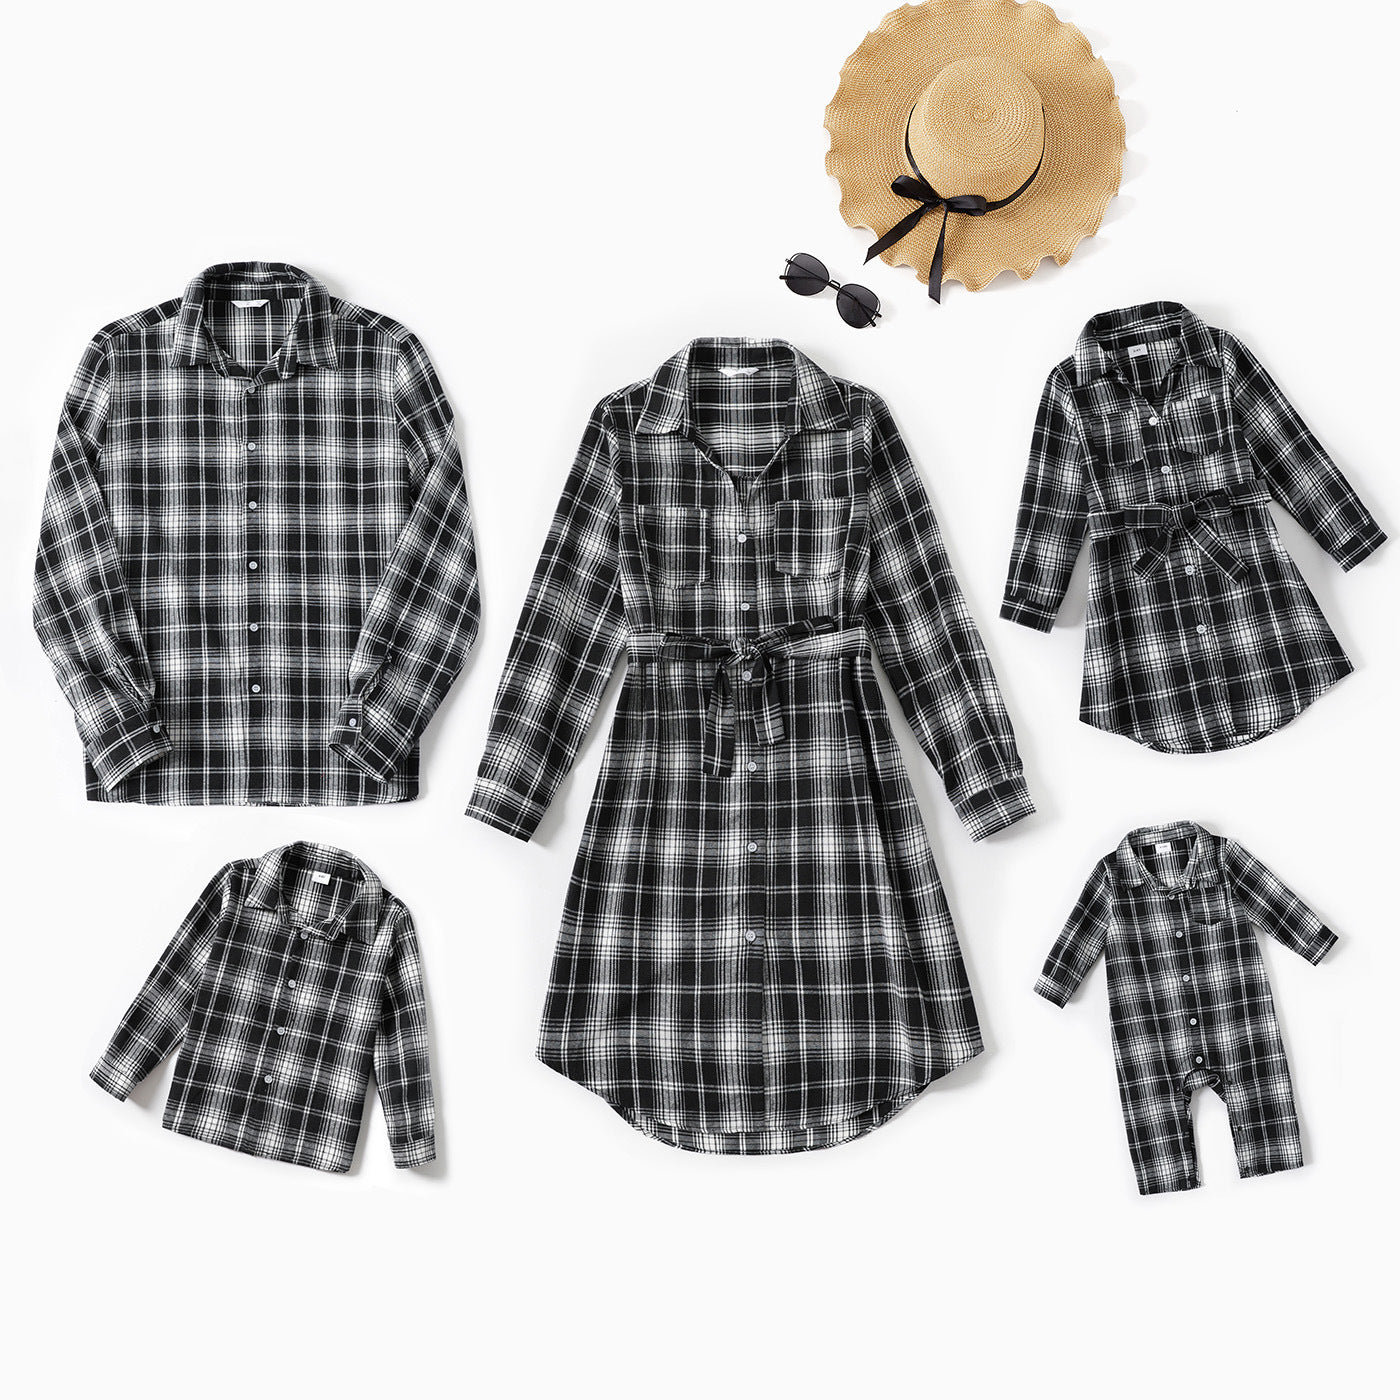 Family Matching Outfit Belted Long Sleeve Shirt Dress and Shirts Sets